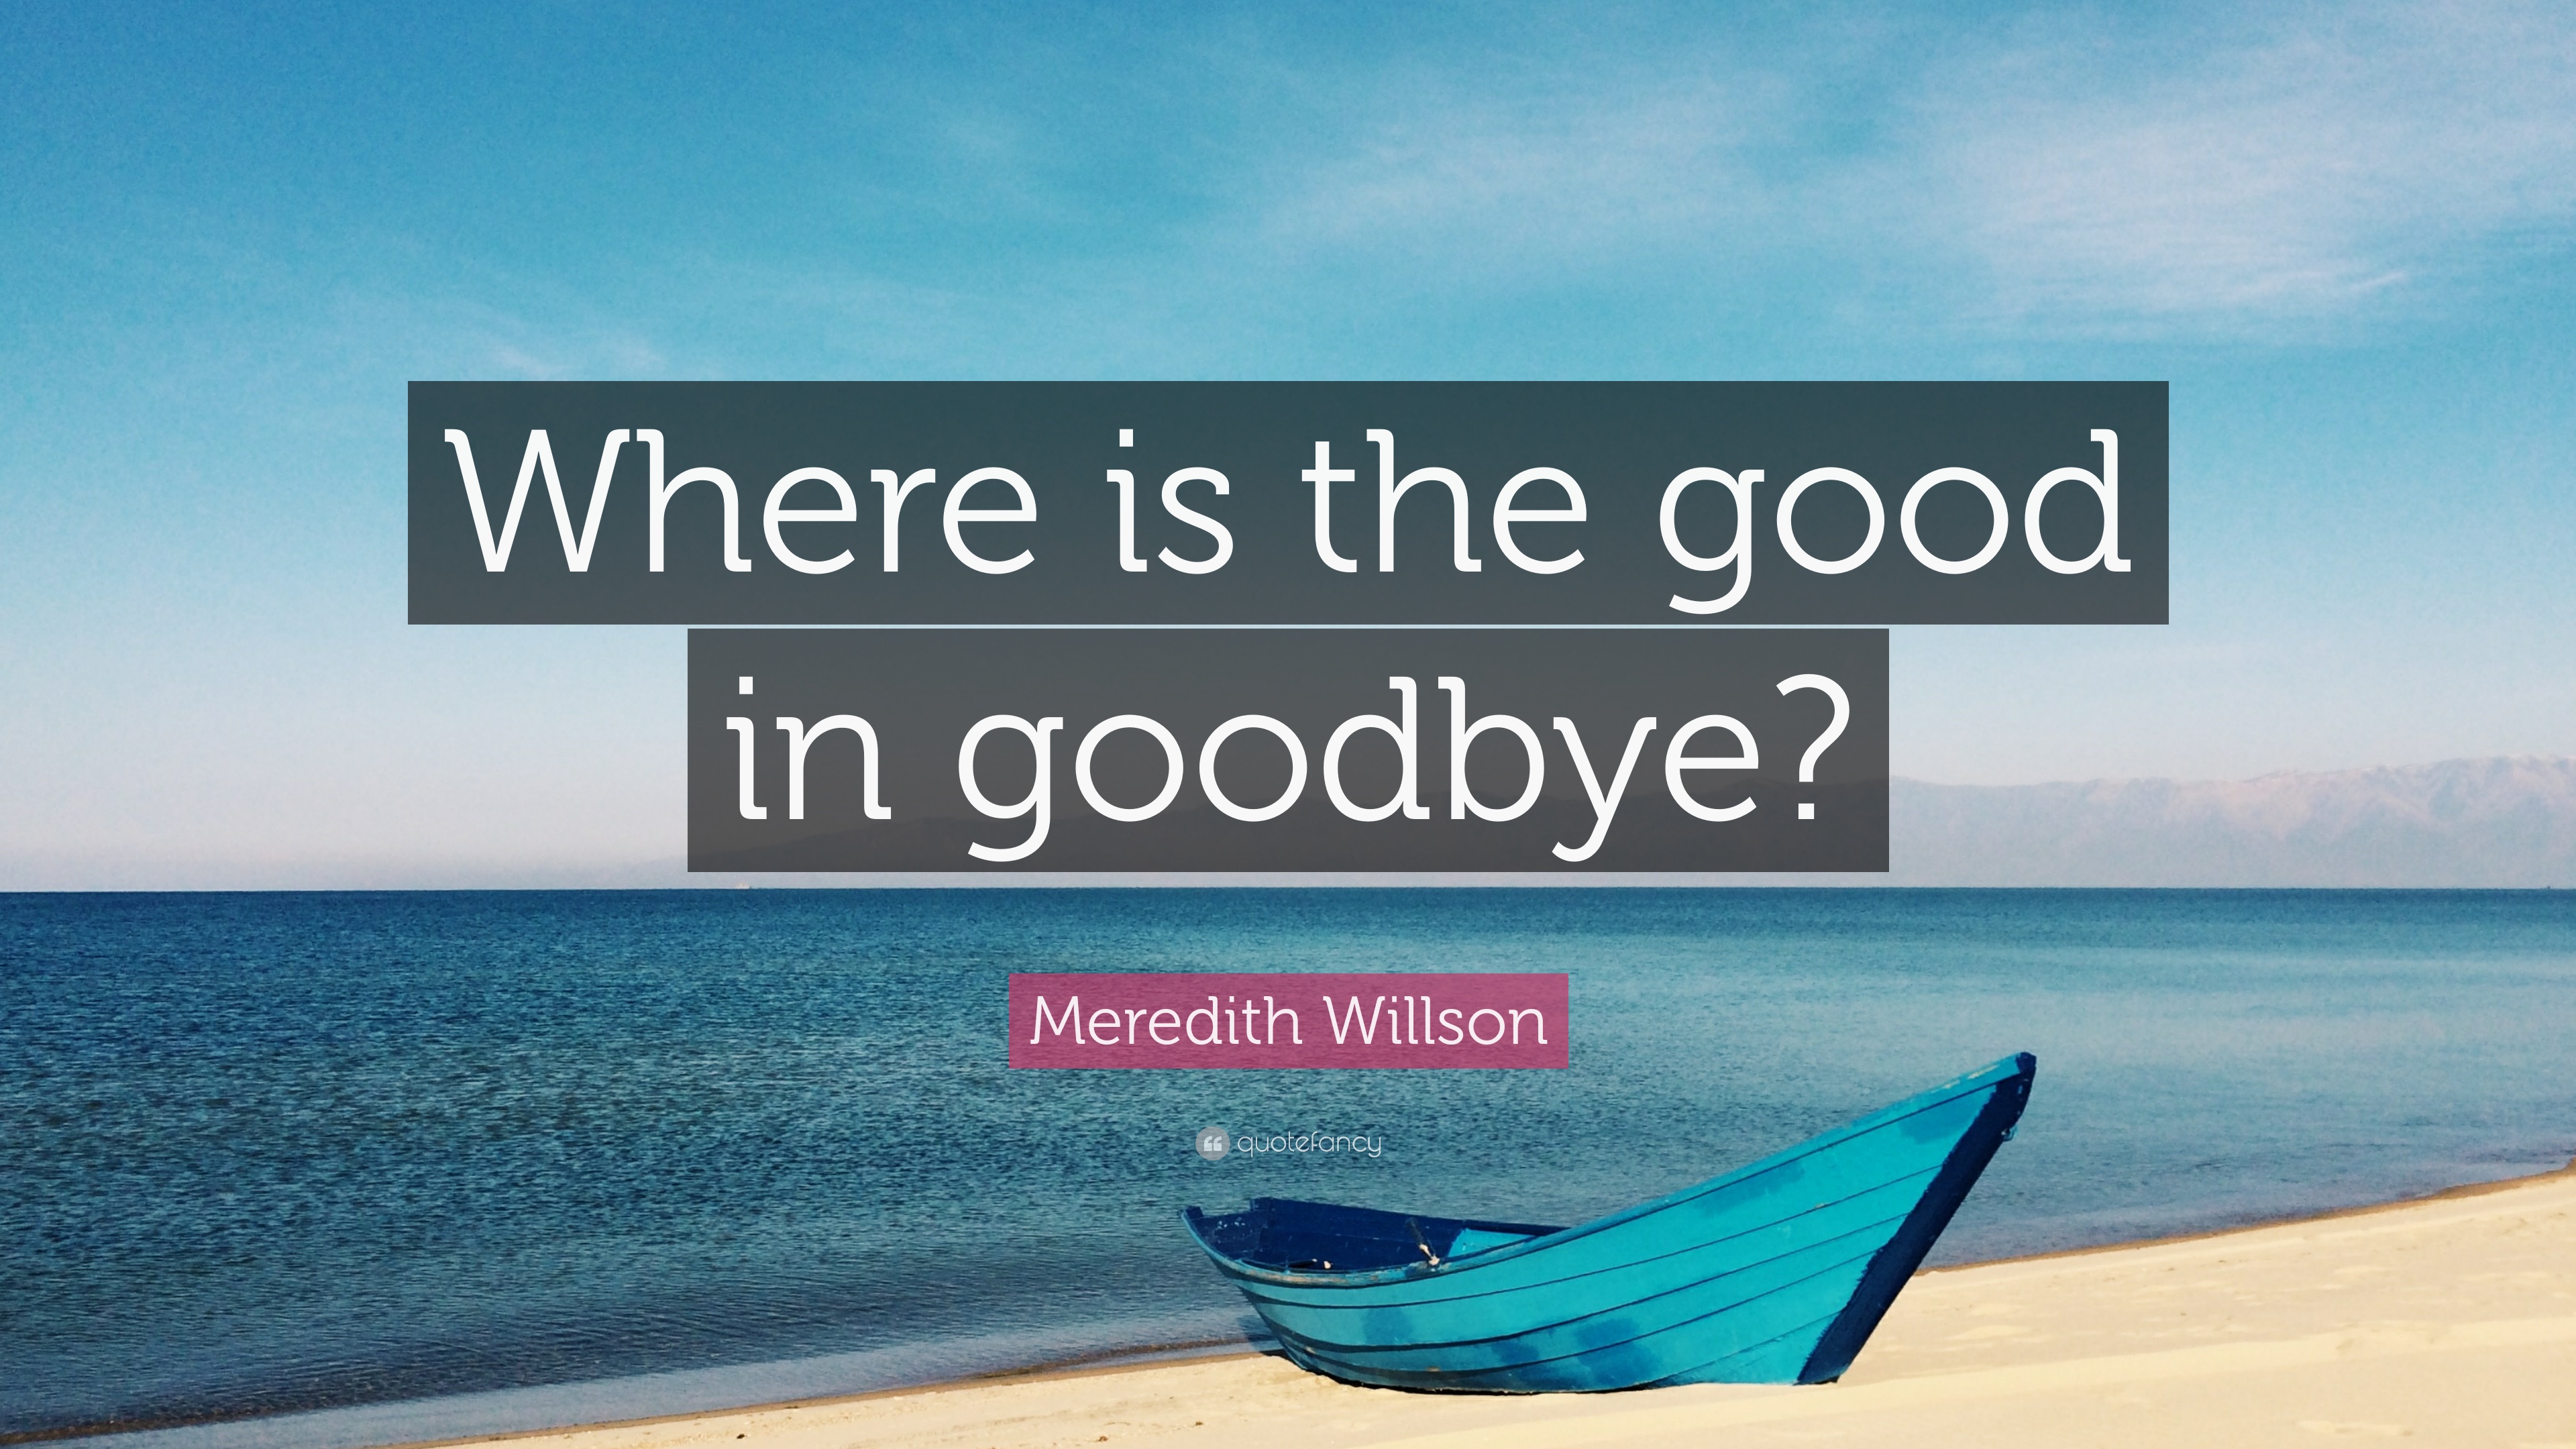 Meredith Willson Quote: “Where is the good in goodbye?” 12